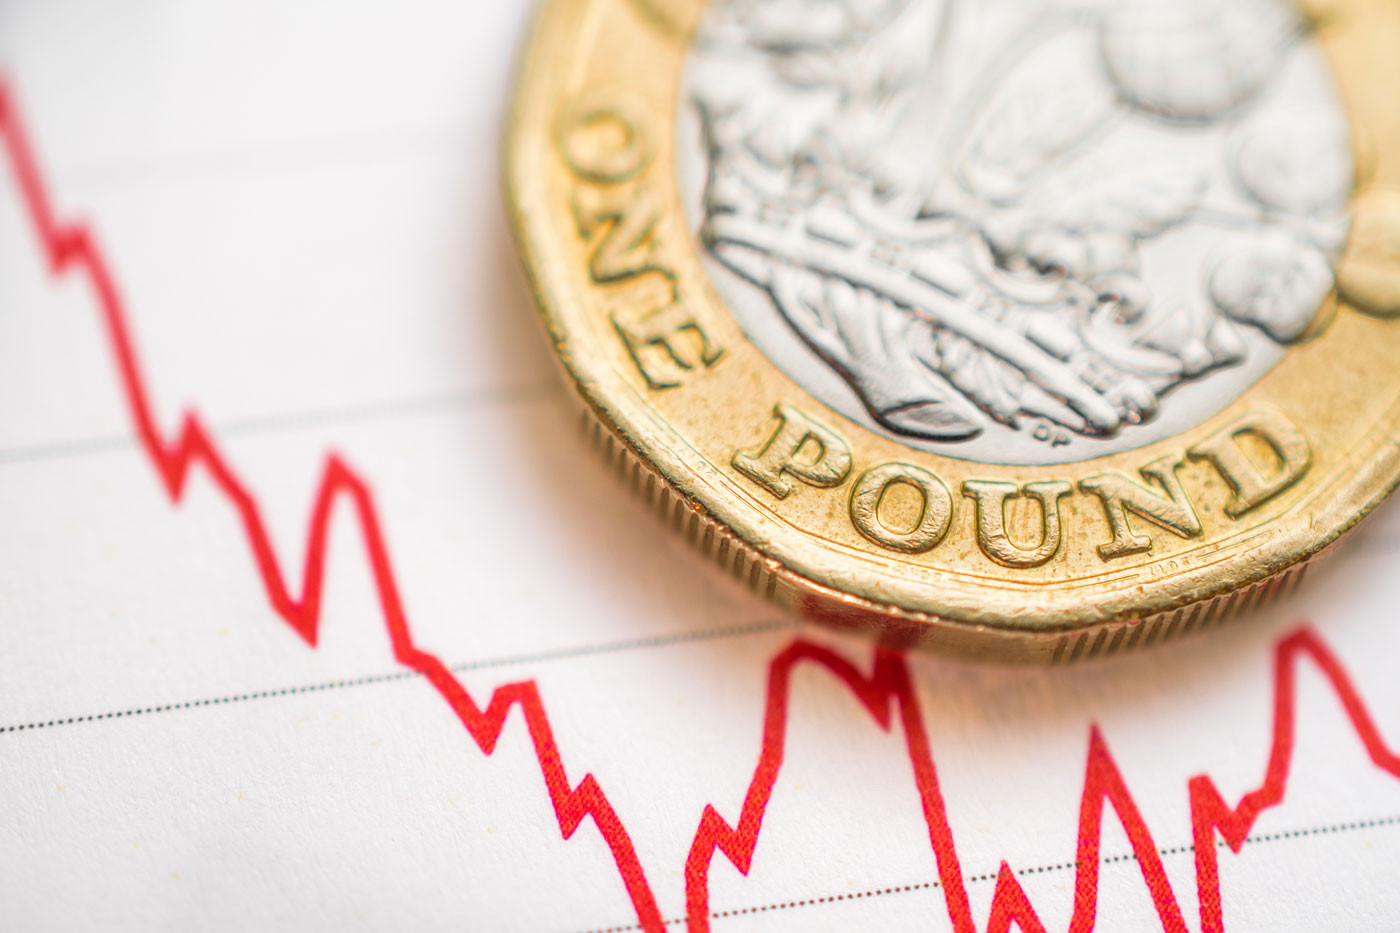 GBP/USD may further decline